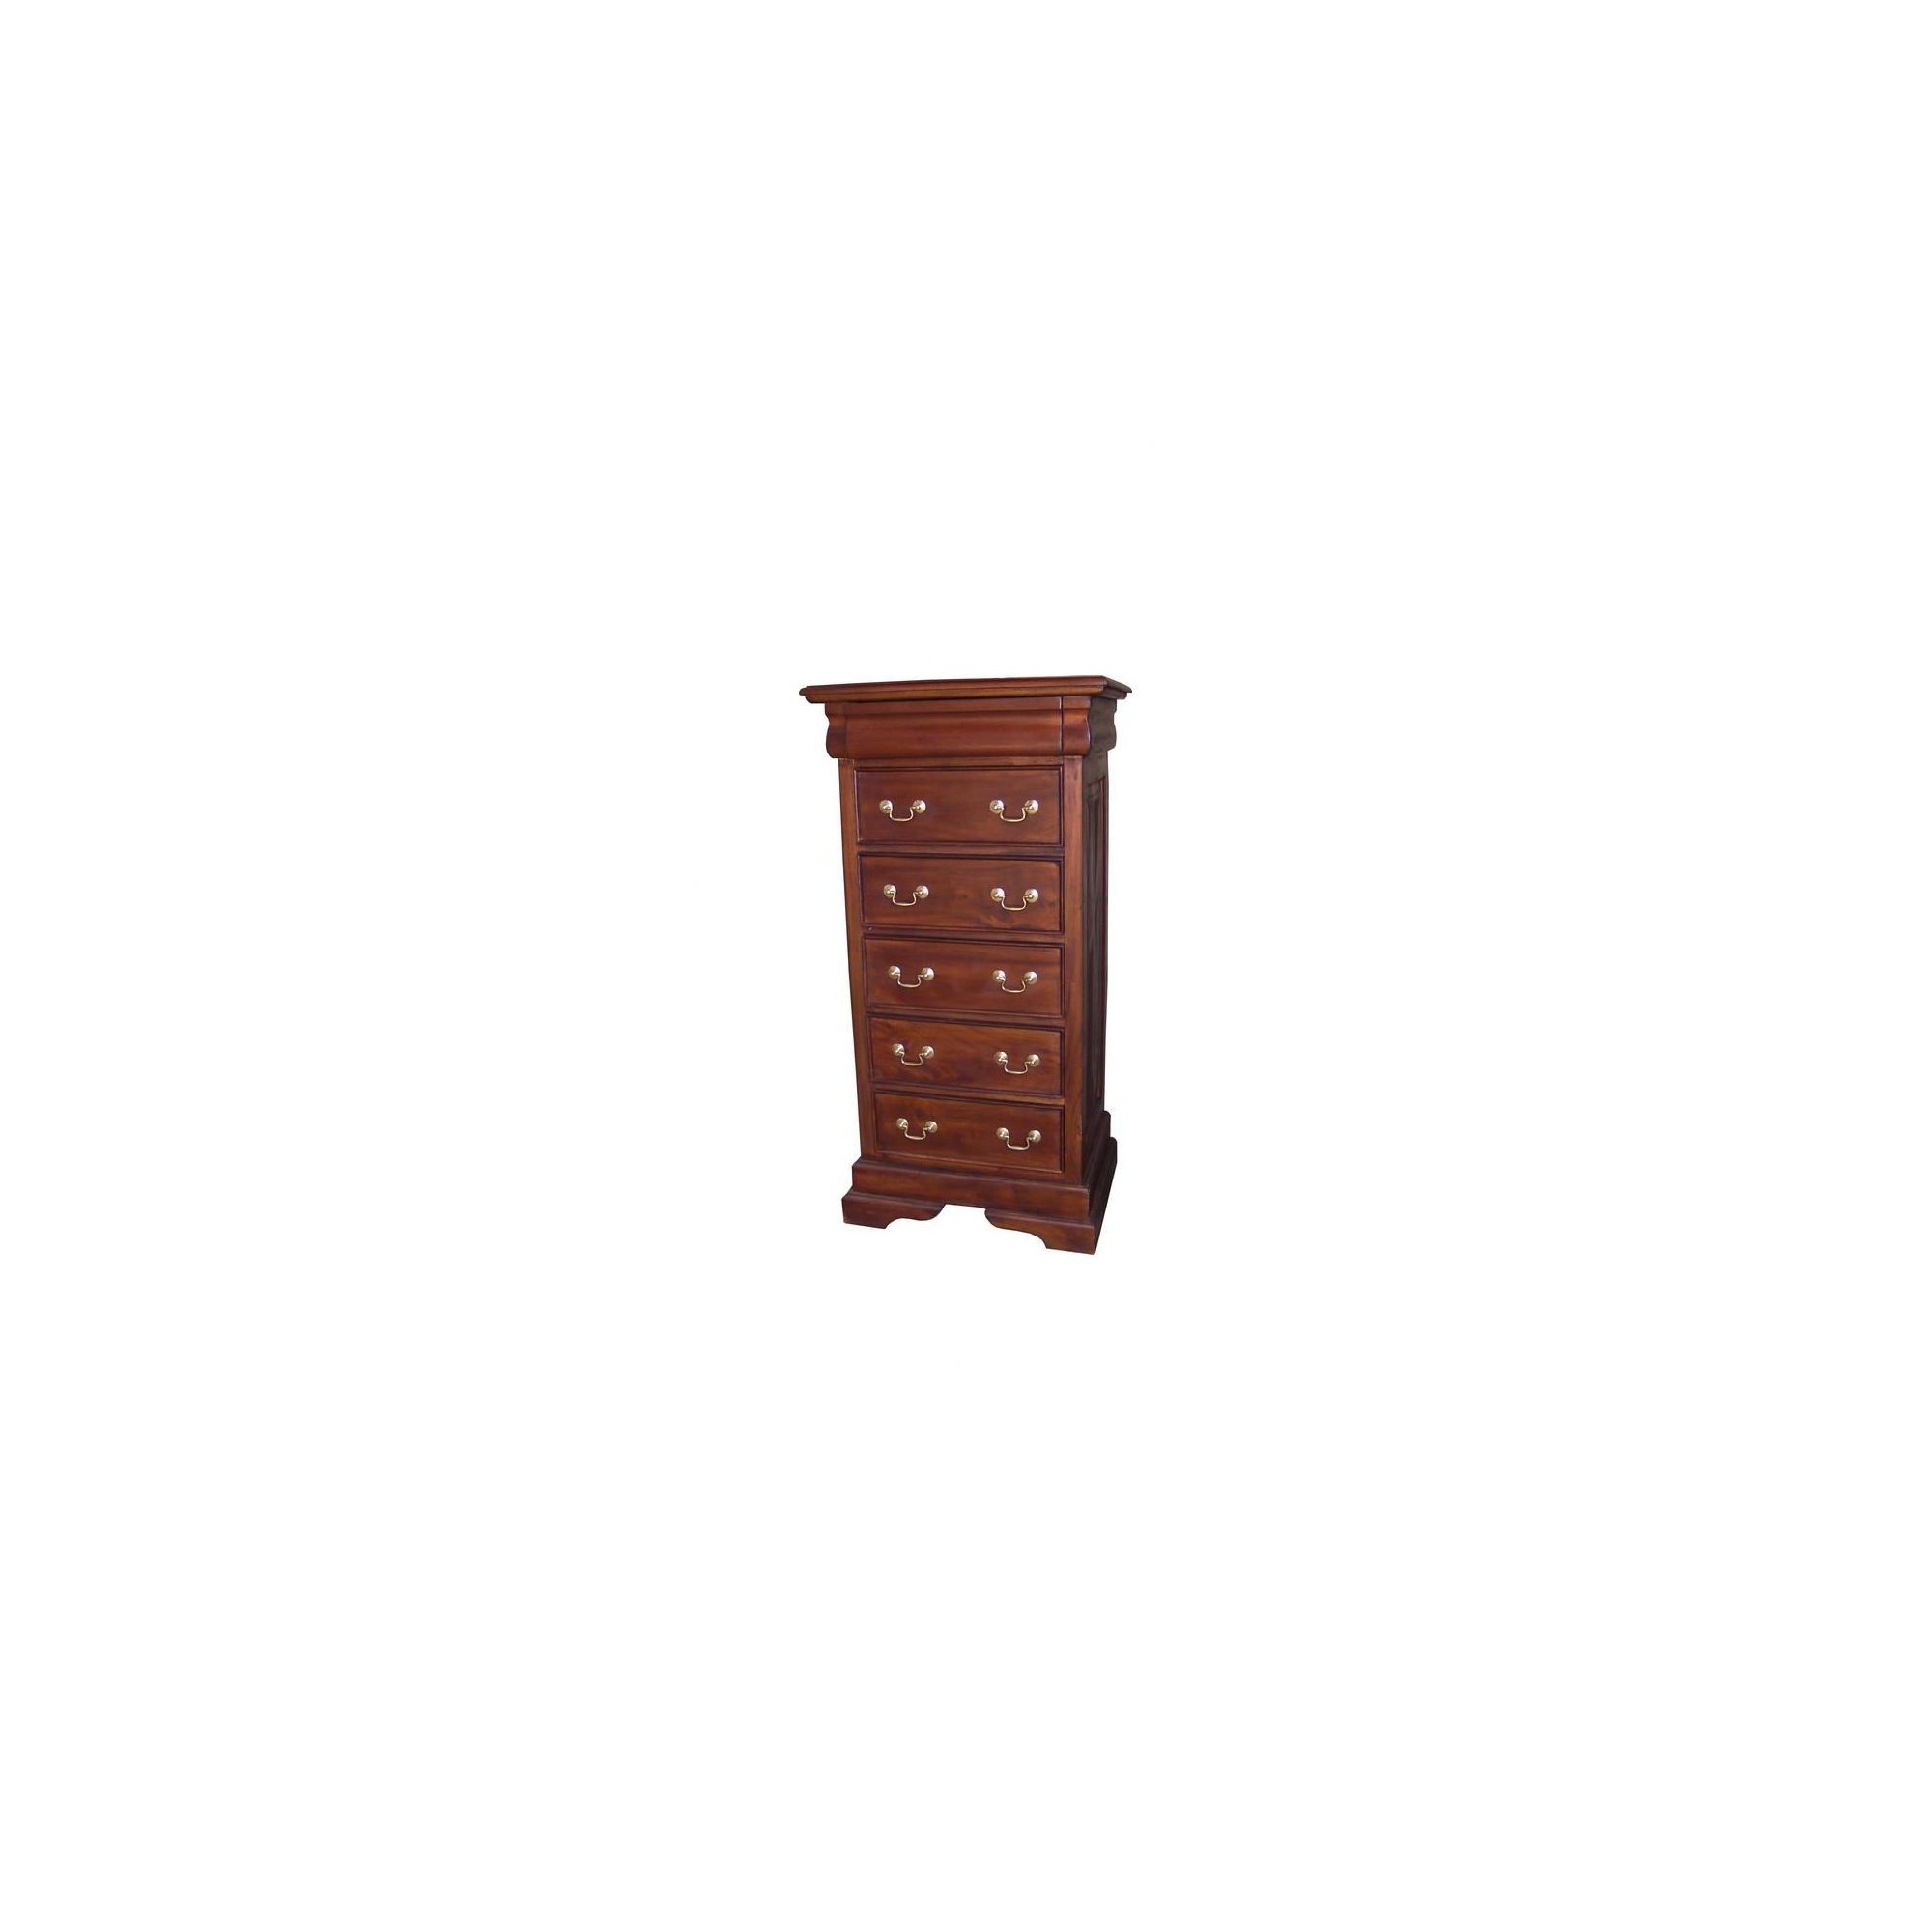 Lock stock and barrel Mahogany 6 Drawer Sleigh Chest - Wax at Tesco Direct